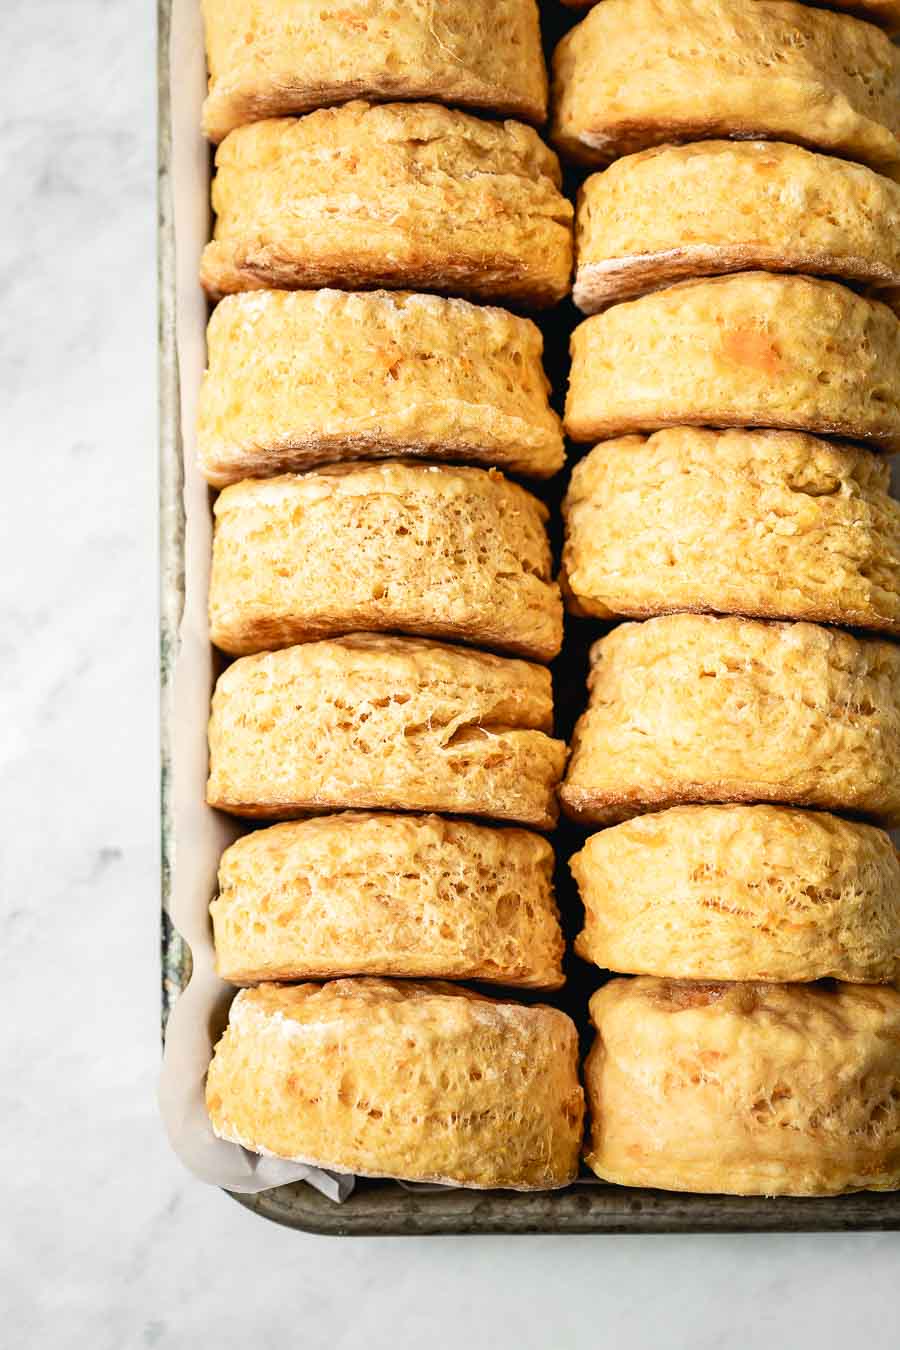 Buttery and flaky sweet potato biscuits are placed on a tray and photographed from the top view.